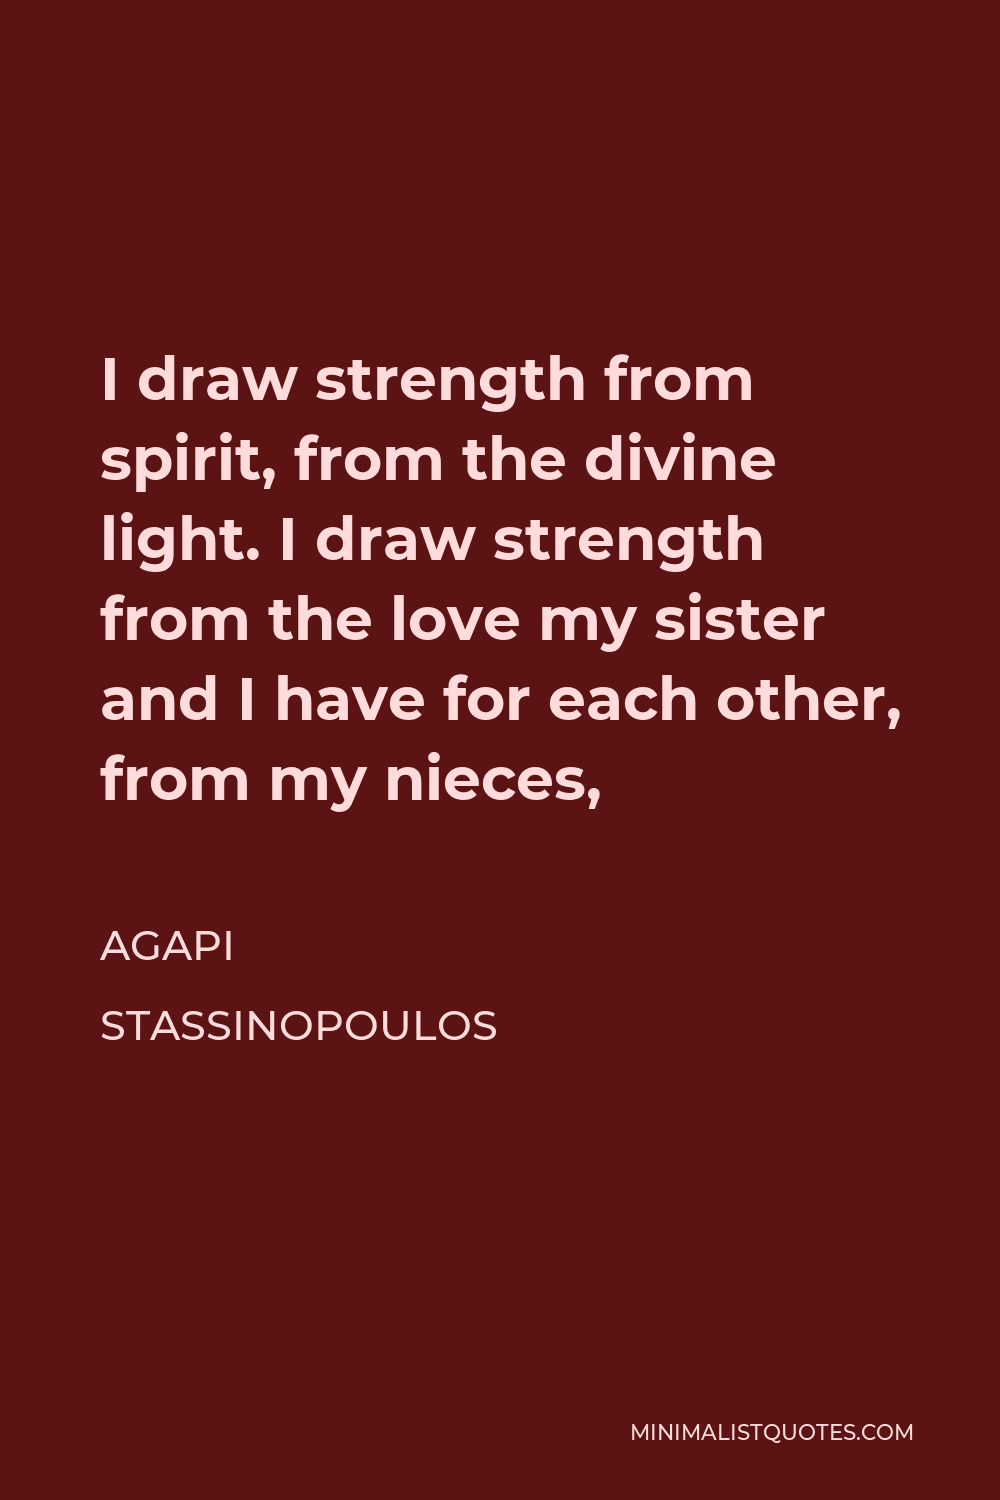 Agapi Stassinopoulos Quote - I draw strength from spirit, from the divine light. I draw strength from the love my sister and I have for each other, from my nieces,